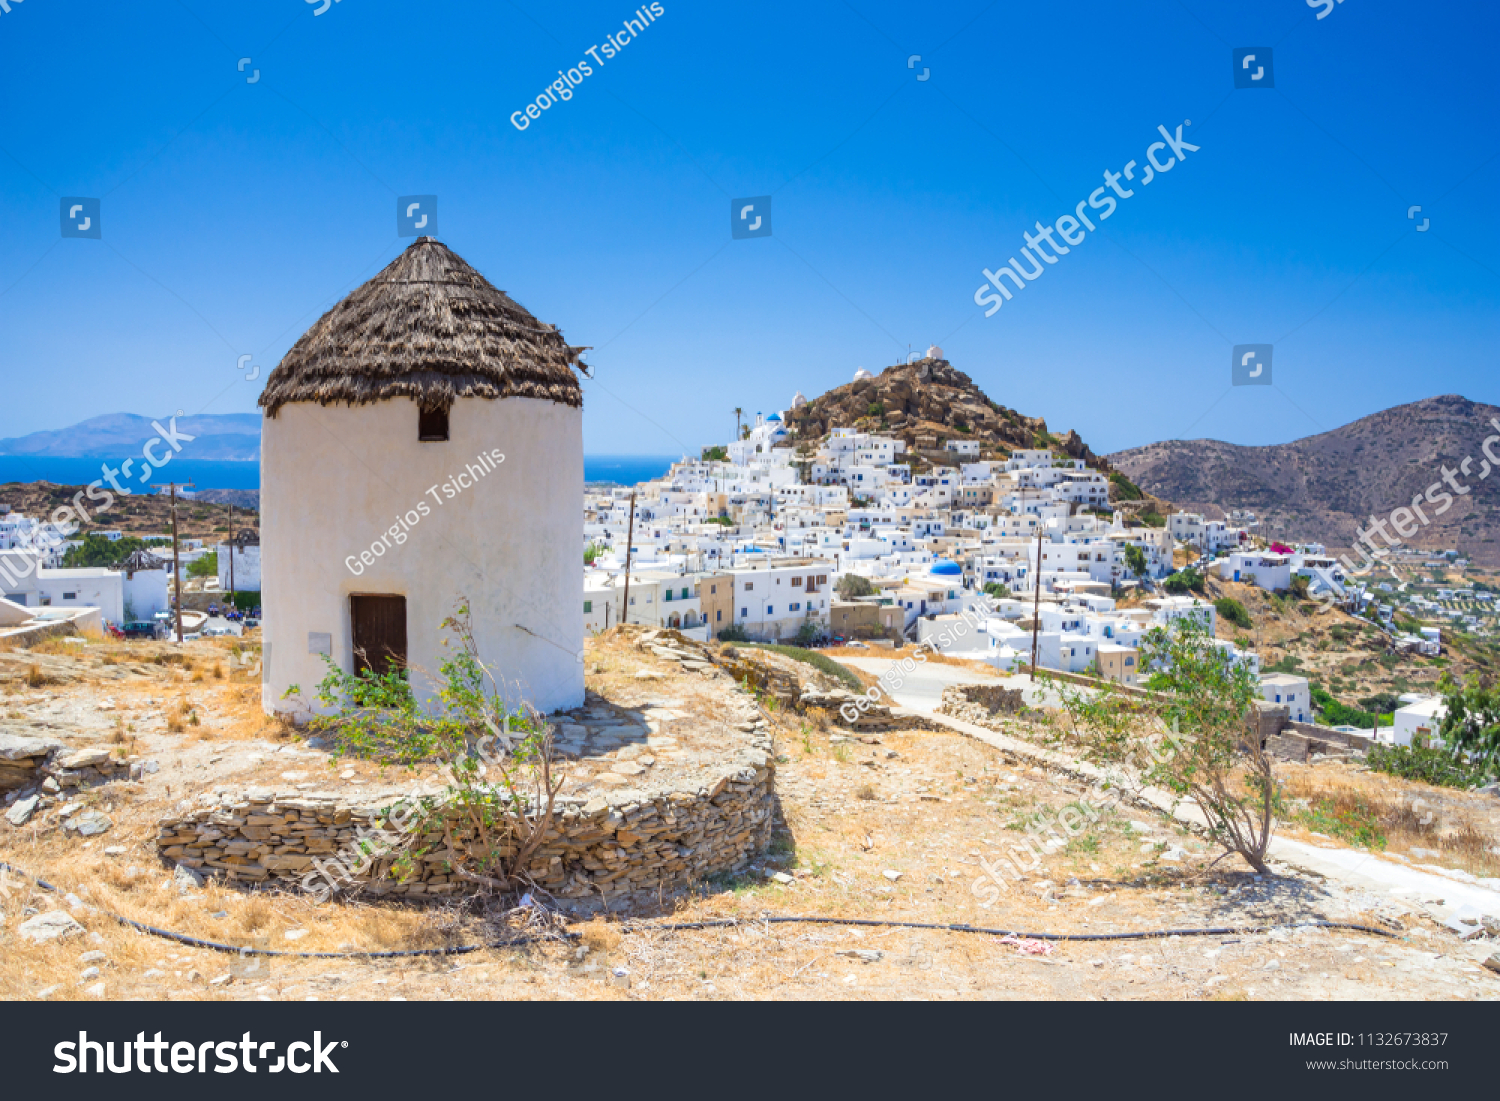 Iconic traditional wind mills in Ios island, Cyclades, Greece. #1132673837